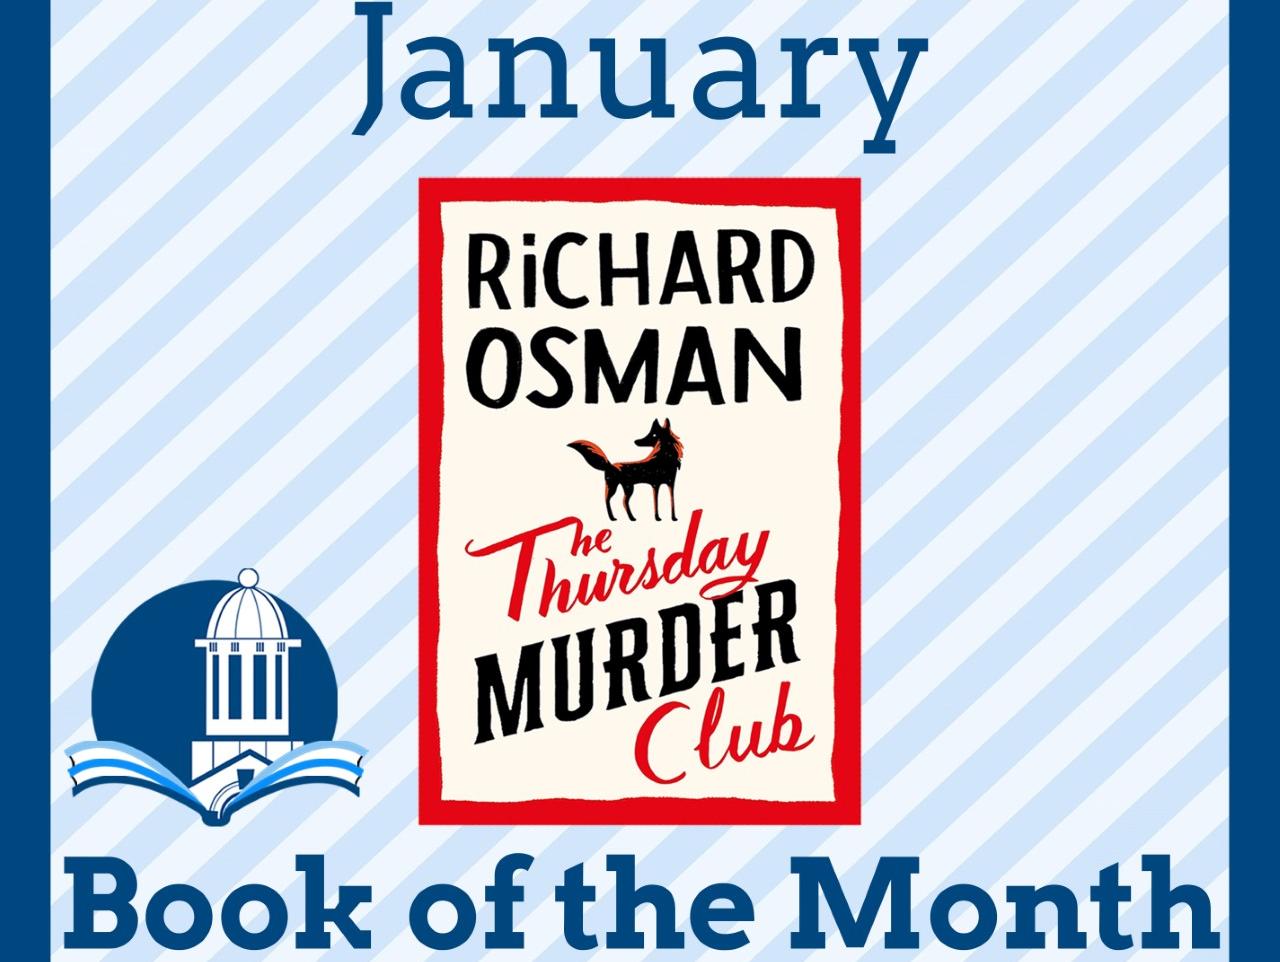 January book of the month